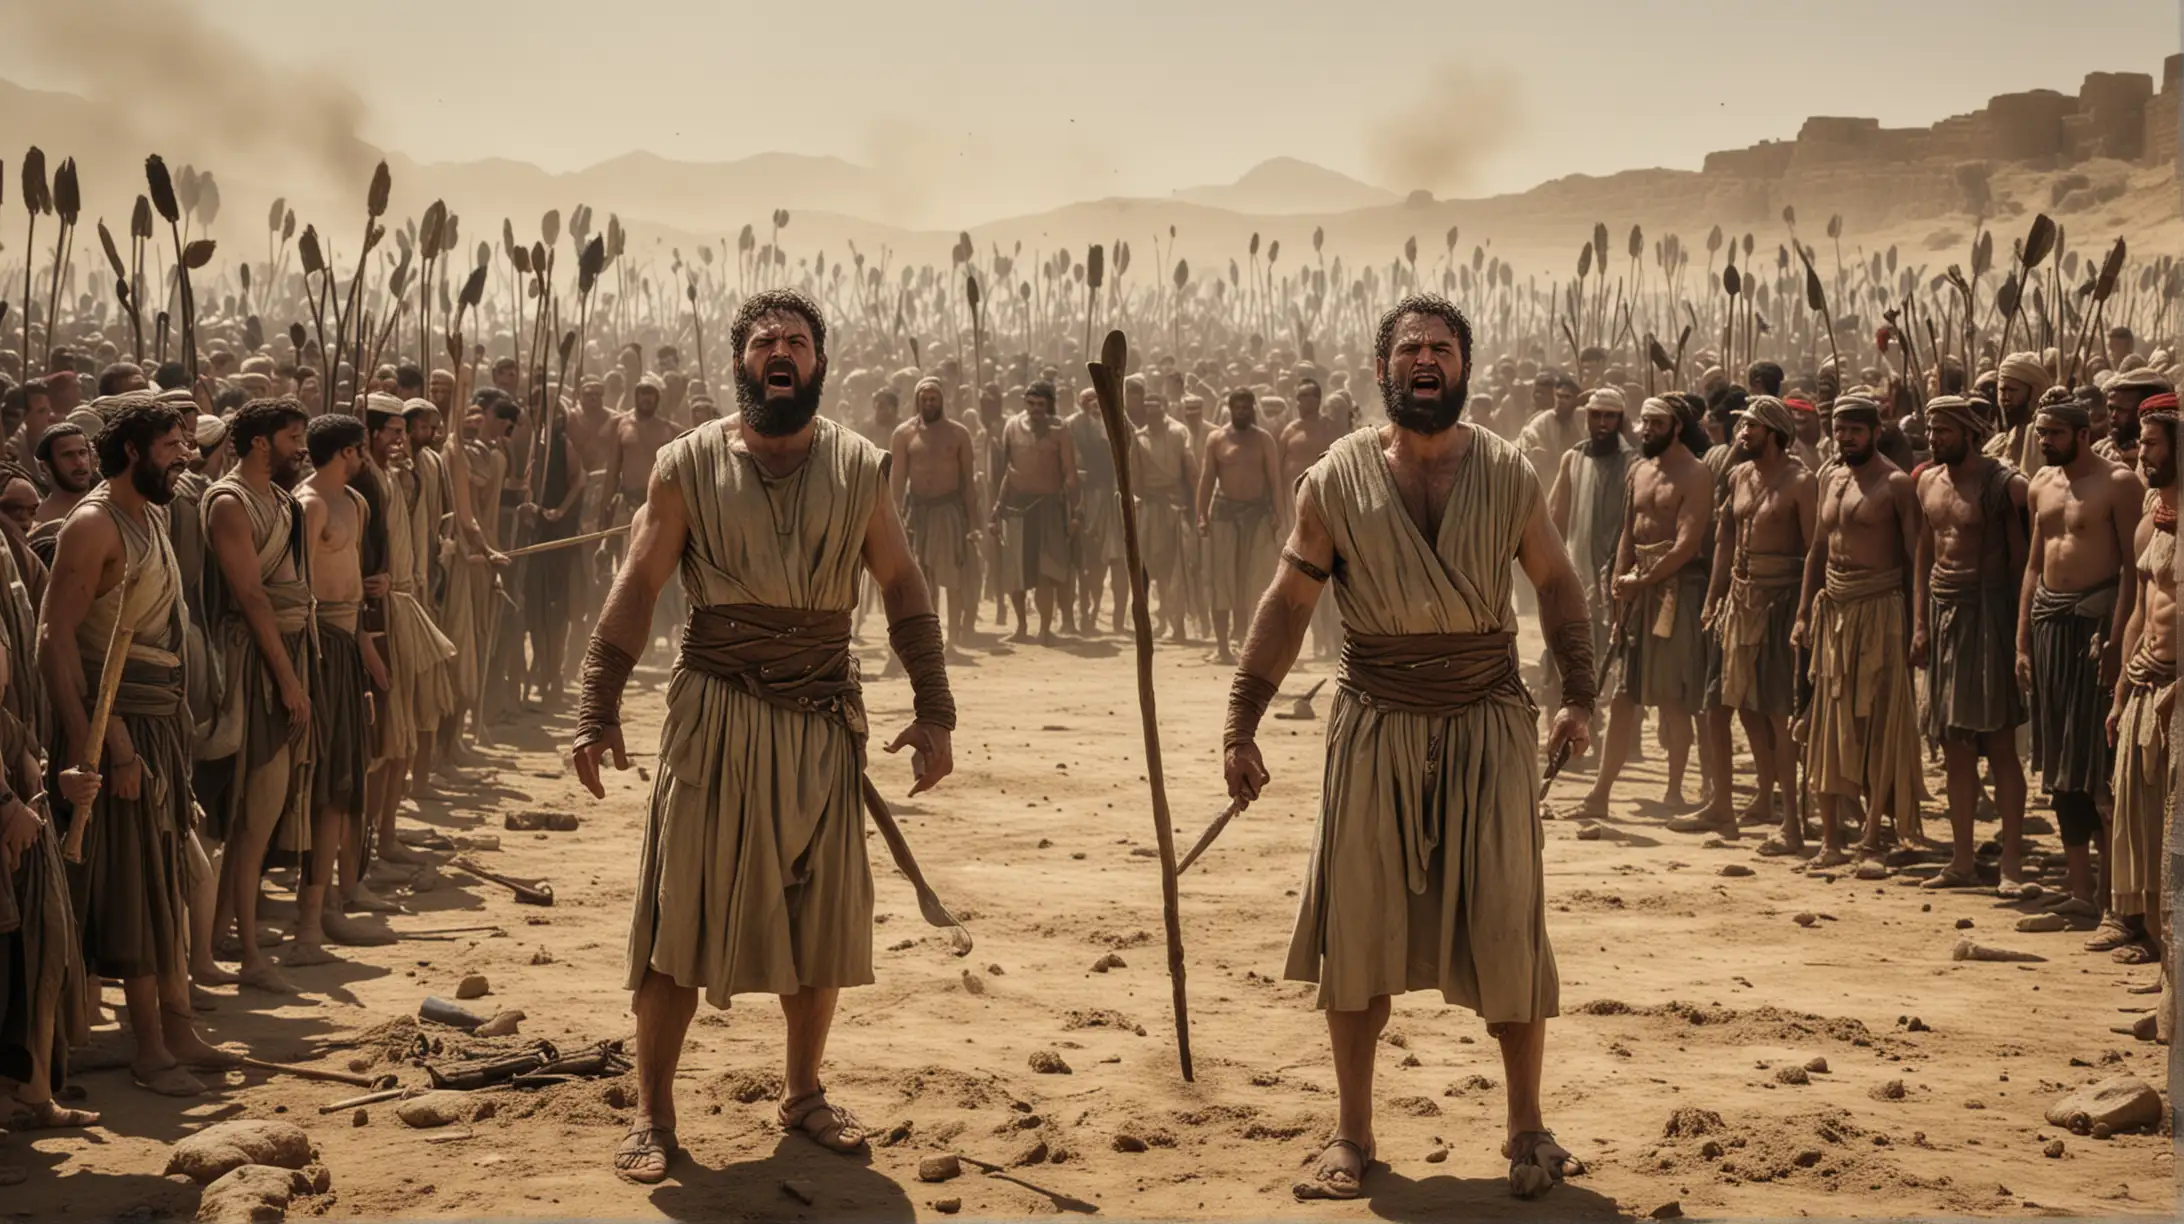 Epic Battle Scene Defiant Warrior Faces Angry Mob in Ancient Middle Eastern Setting